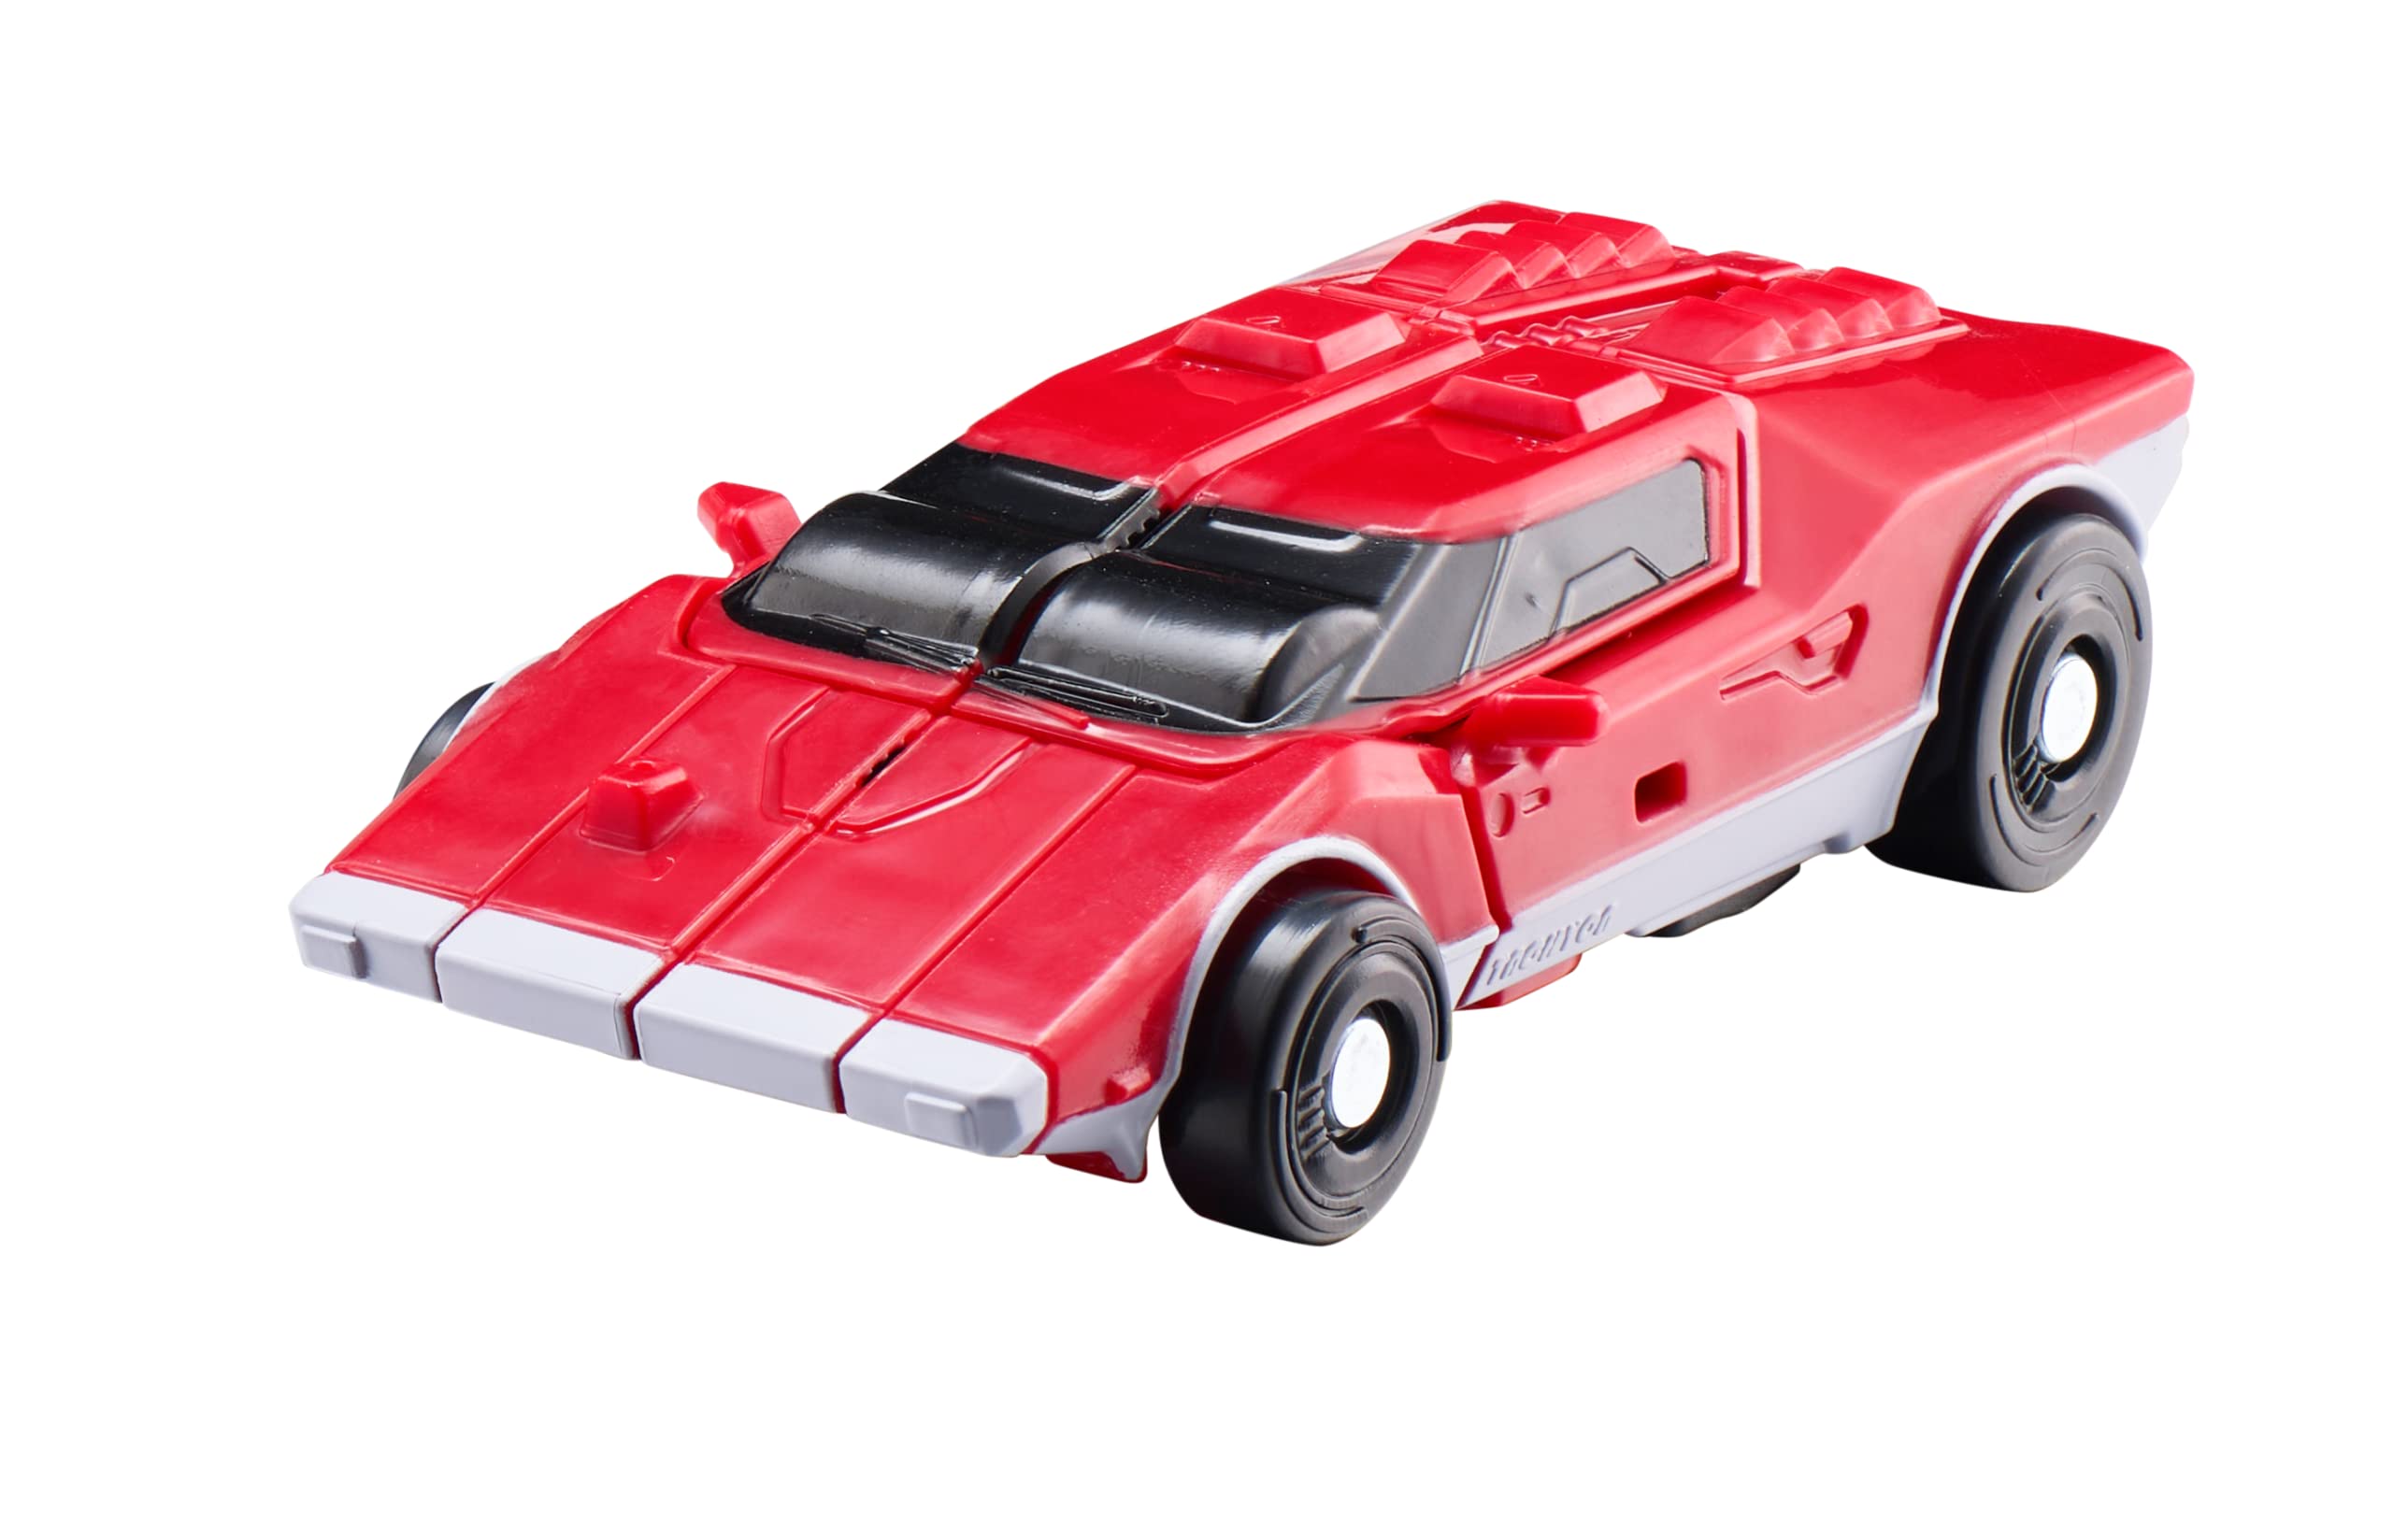 TOBOT GD Mini King Titan, Youngtoys Transforming Collectible Vehicle to Robot Animation Character